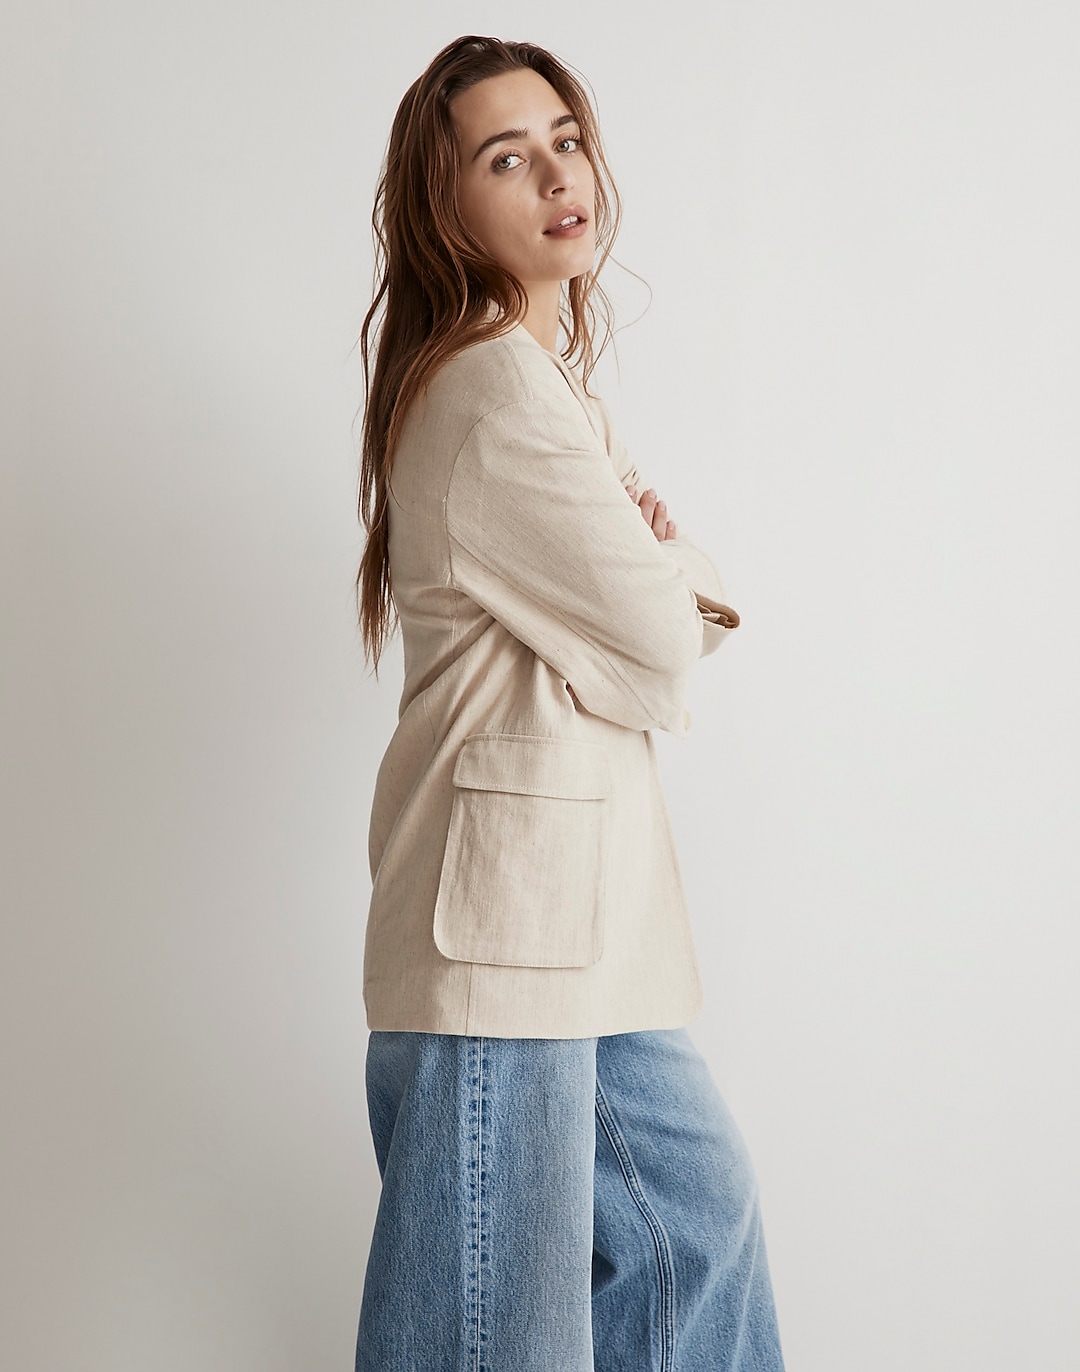 The Cargo Double-Breasted Blazer in Linen-Cotton | Madewell